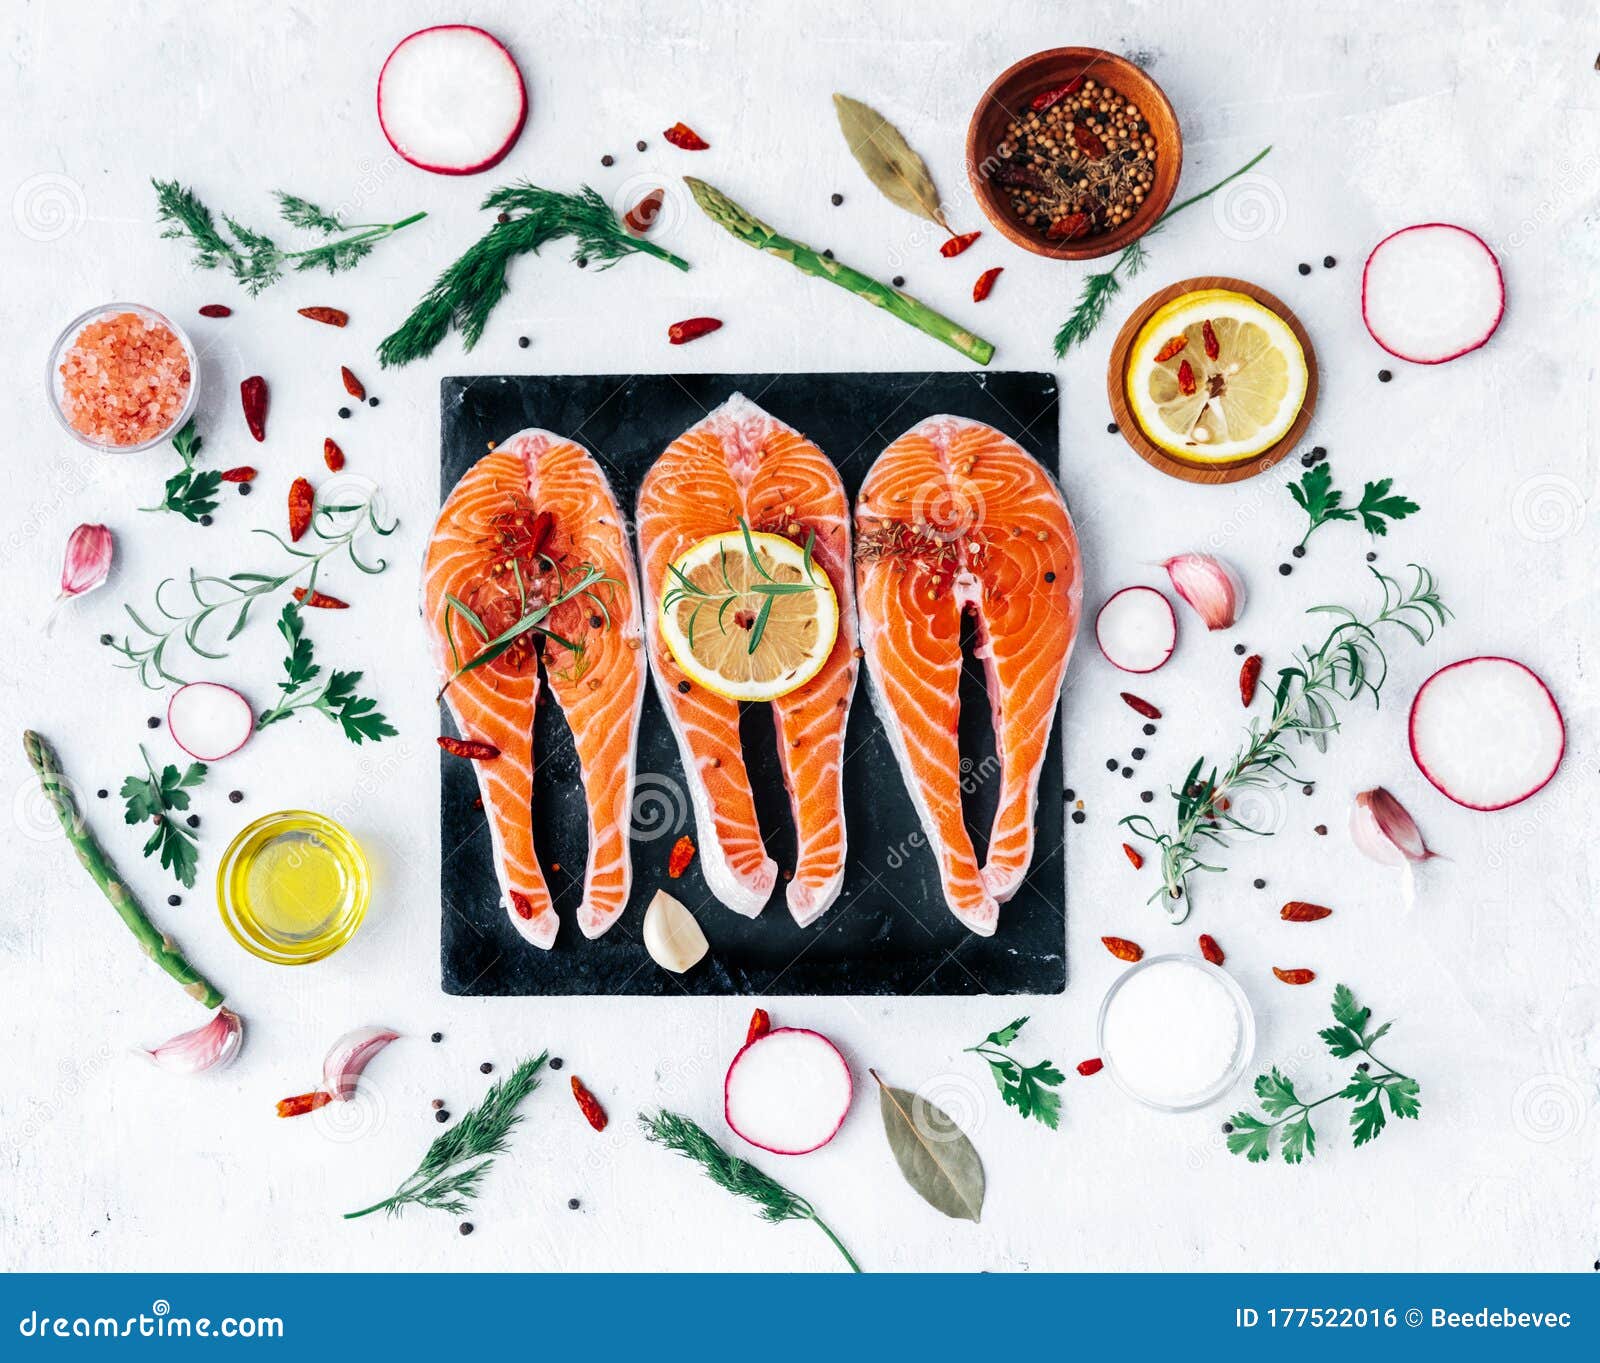 raw salmon fish fillet with fresh herbs